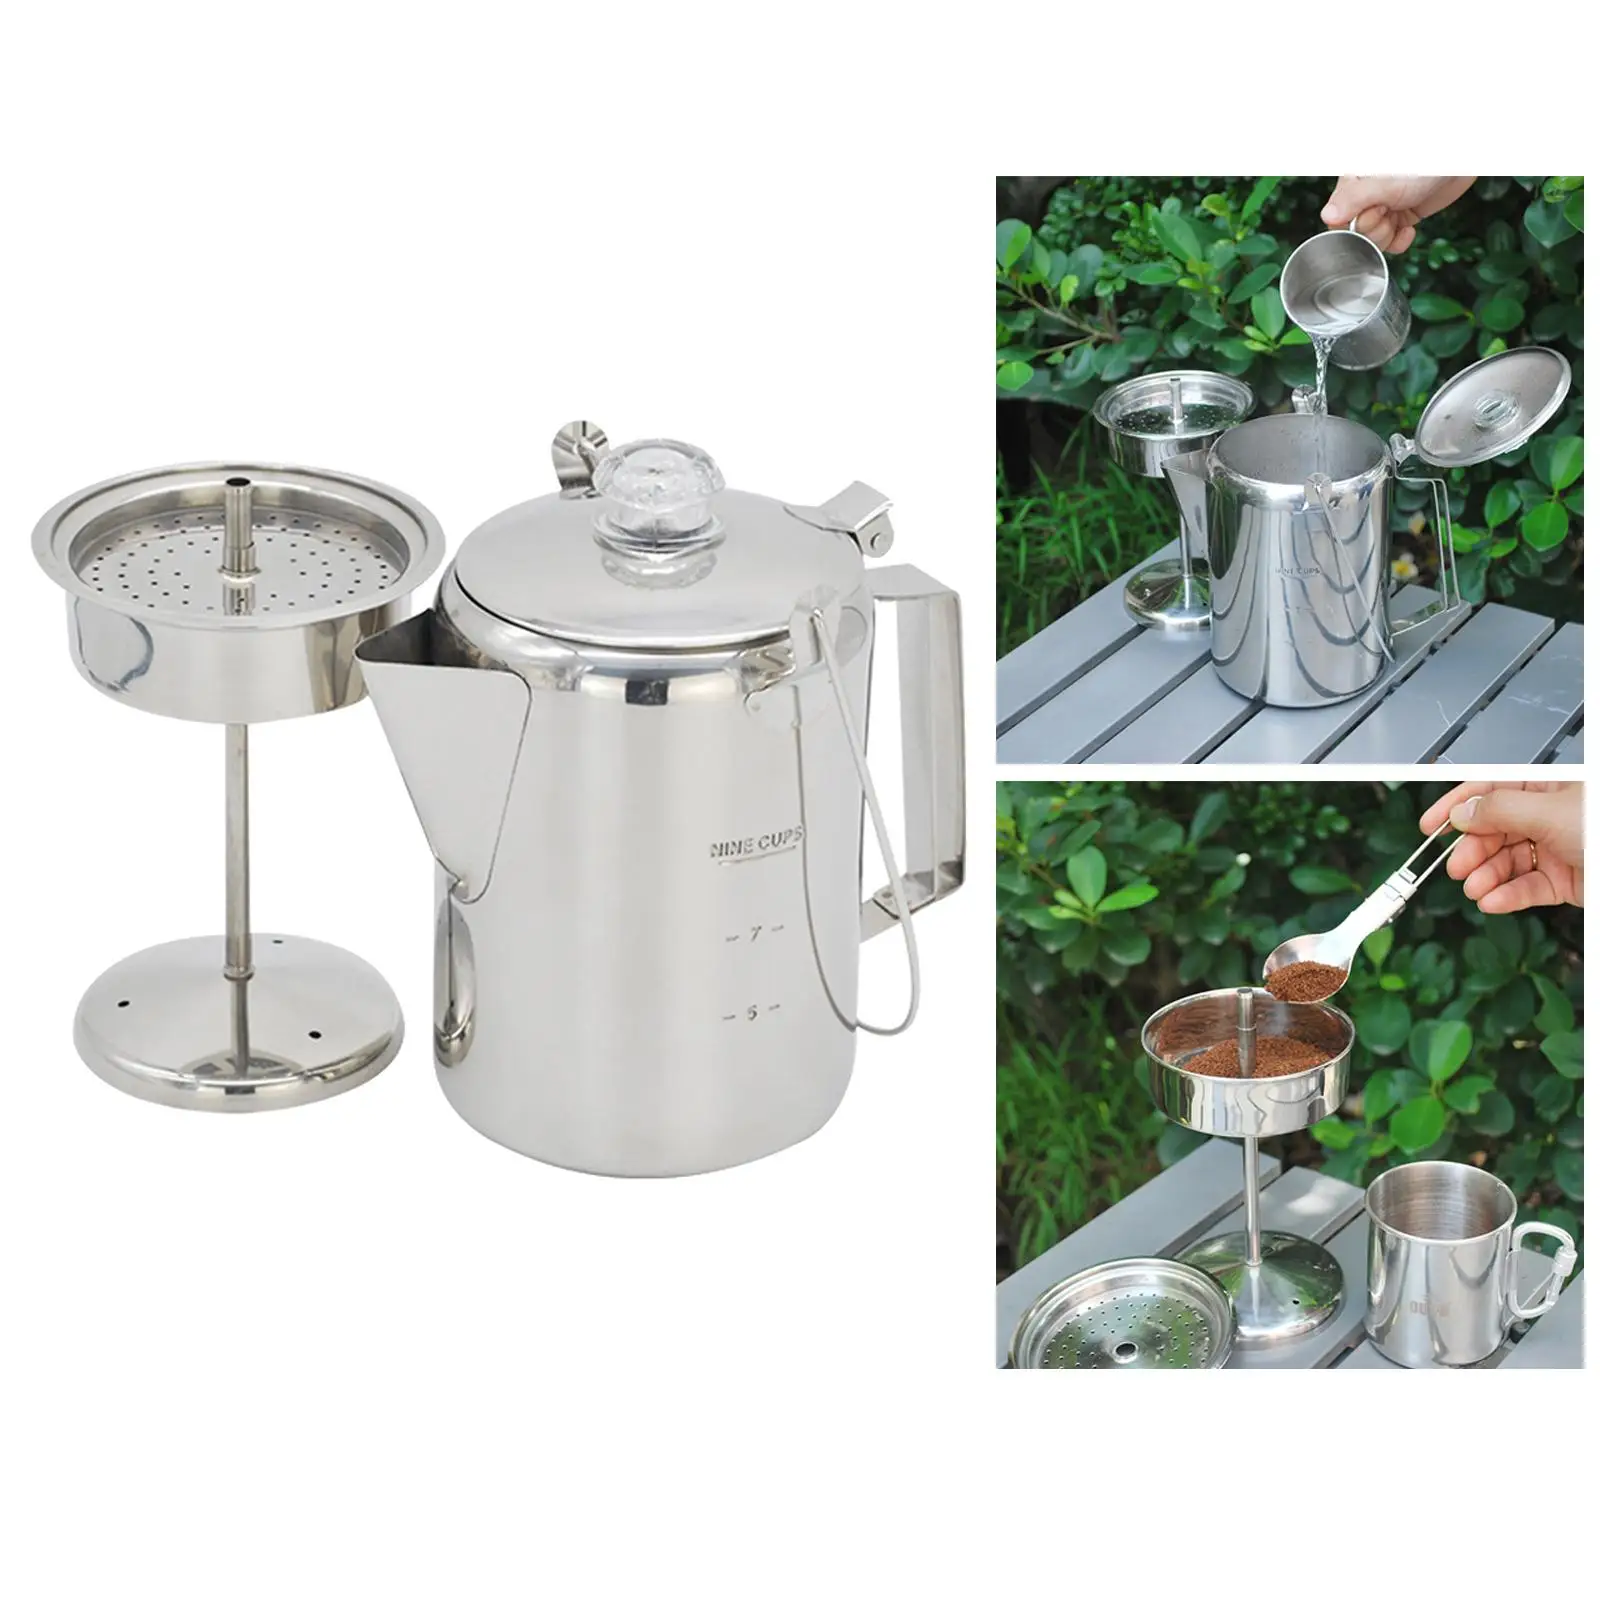 Portable Stainless Steel Camping Water Cup with Handles and Lid - Ideal for Outdoor Activities